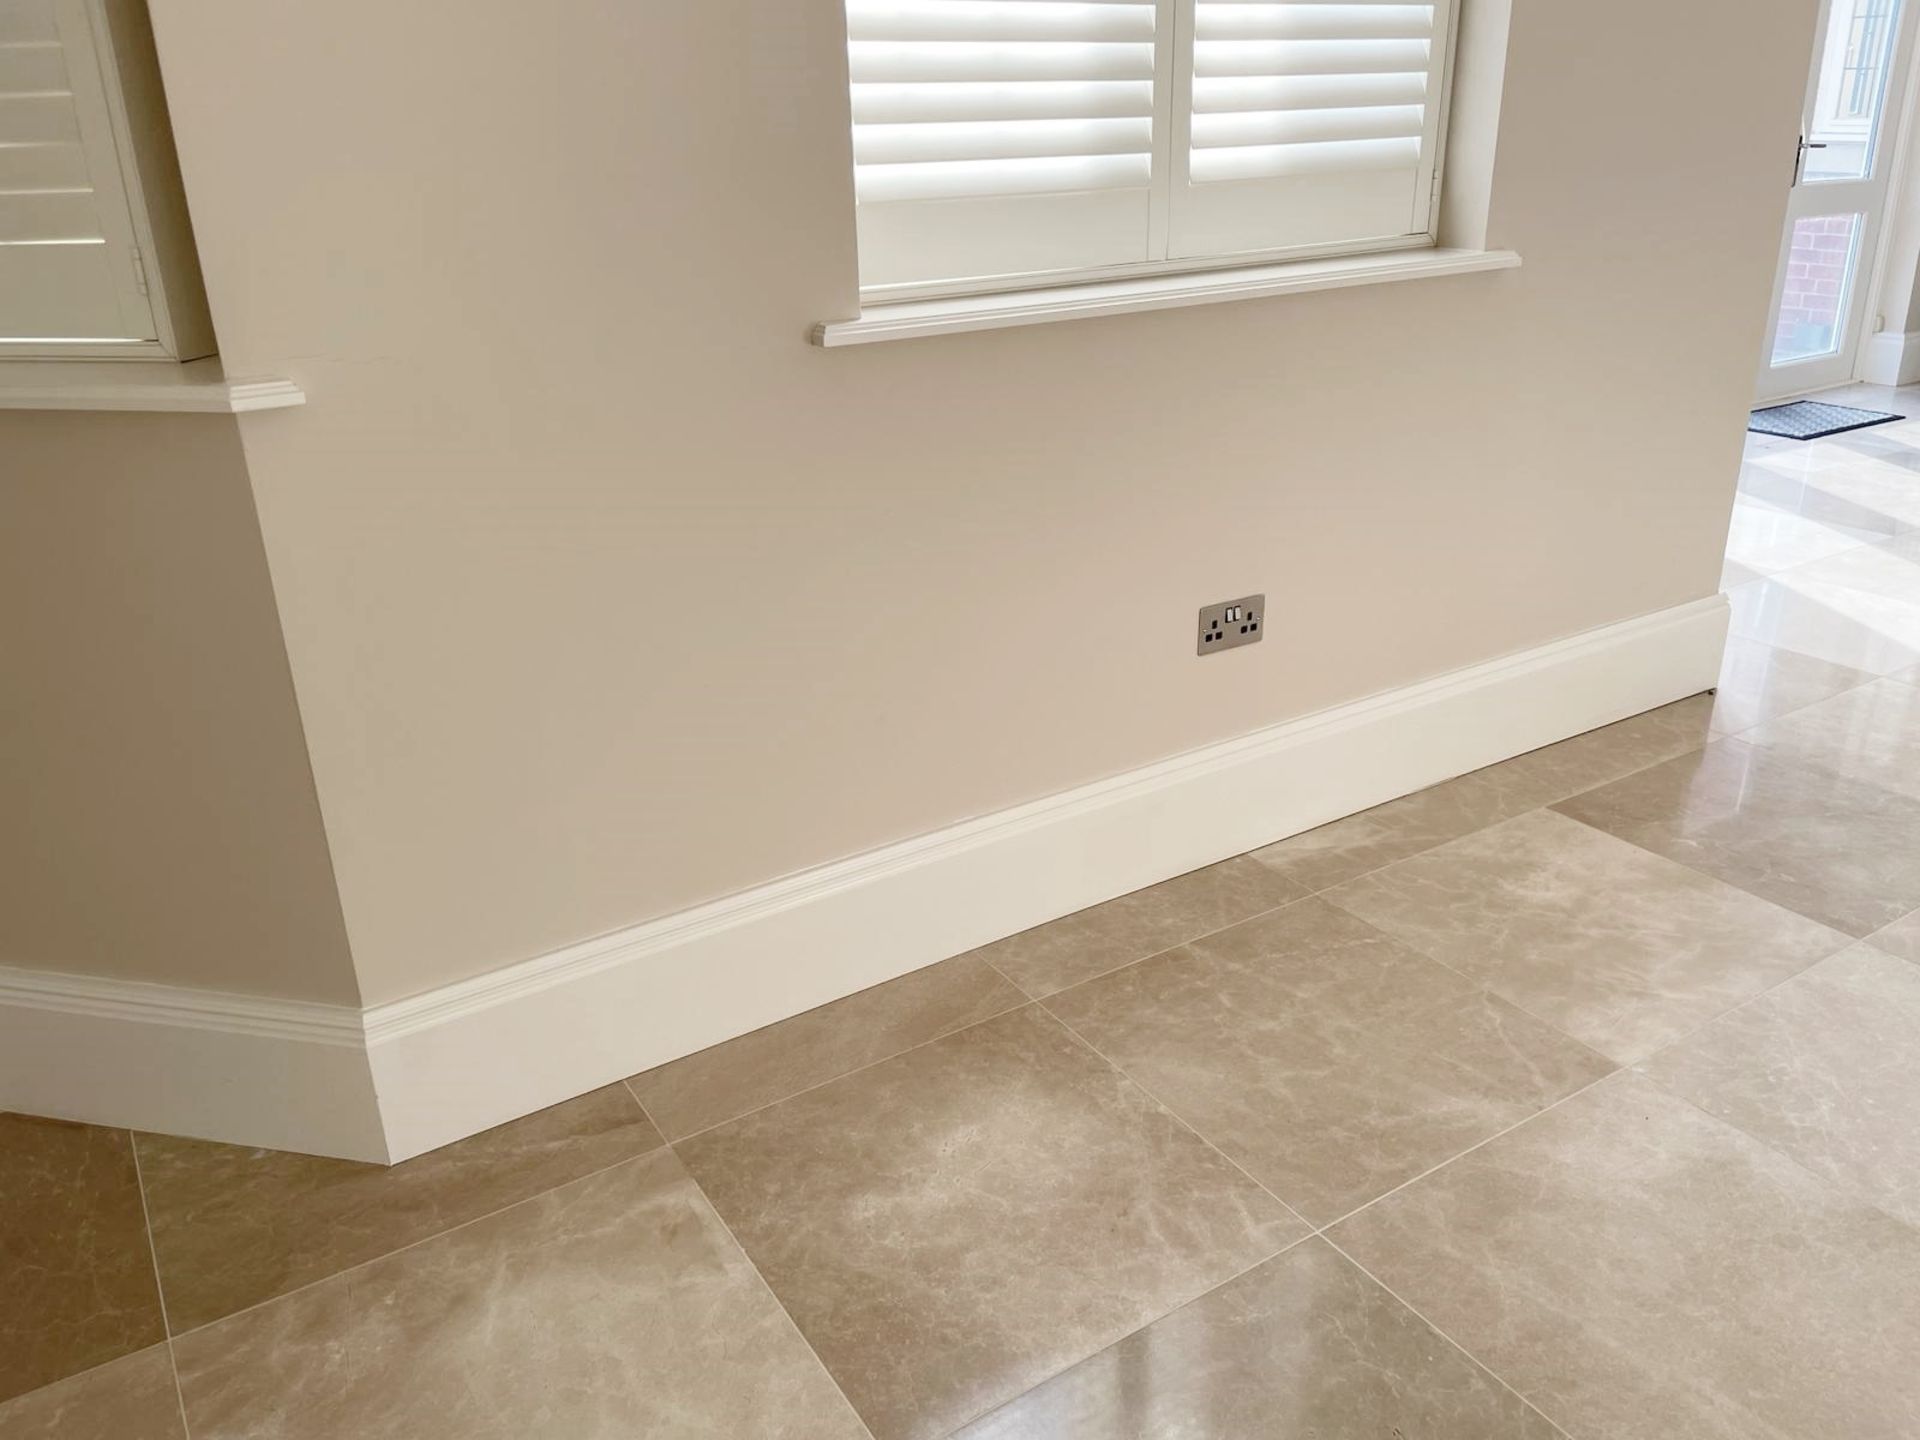 Approximately 20-Metres of Painted Timber Wooden Skirting Boards, In White - Image 6 of 7